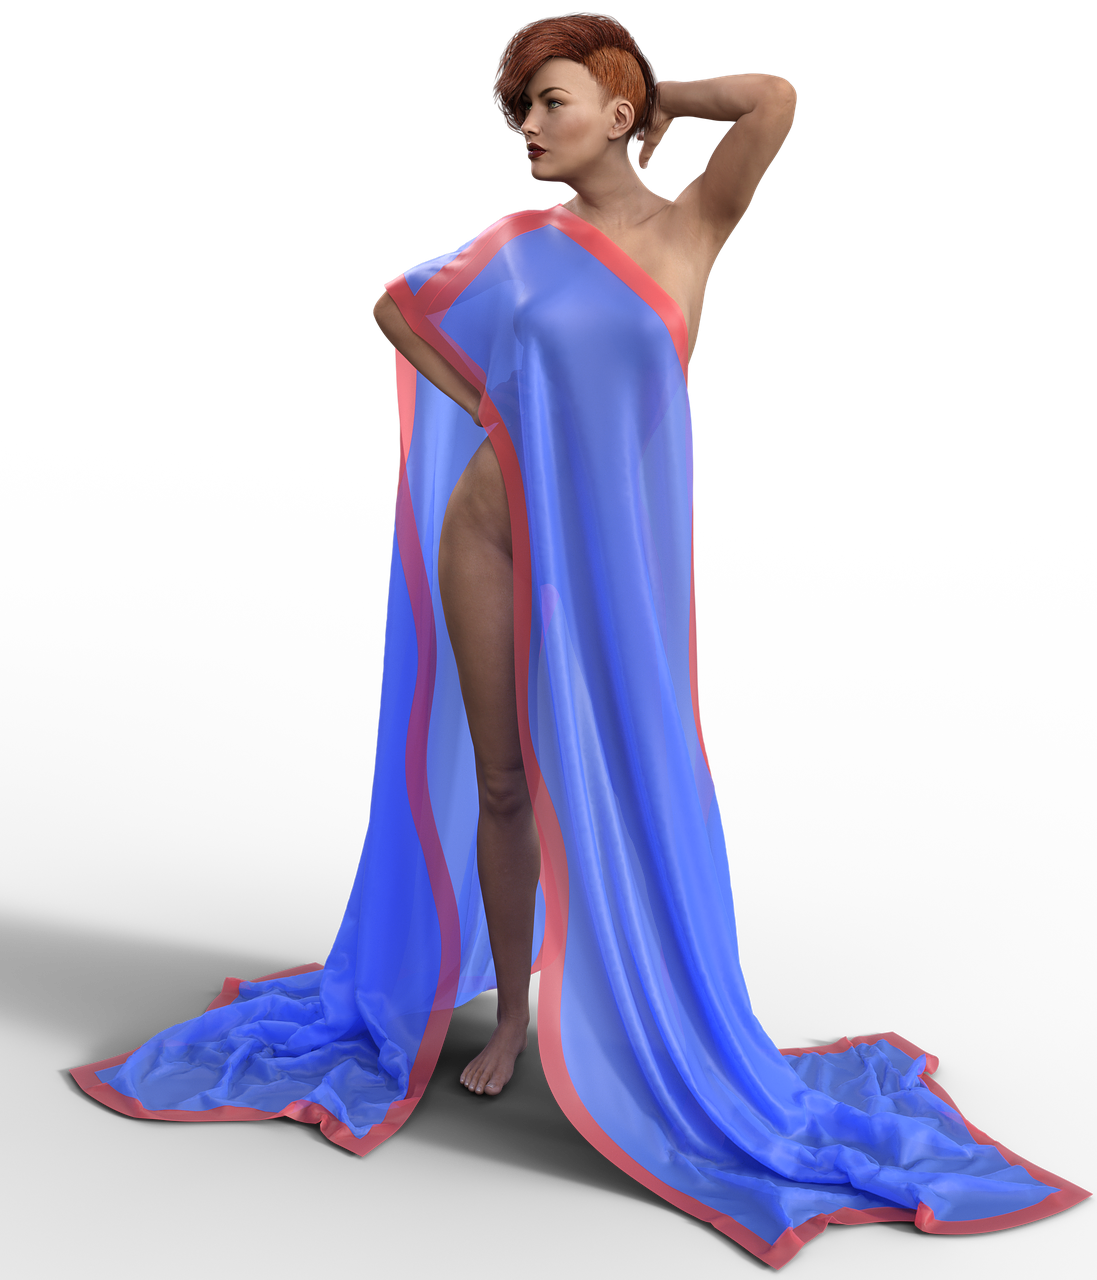 a woman in a blue and pink dress, a raytraced image, by Juan O'Gorman, featured on zbrush central, digital art, large draped cloth, sexy gown, blue and red, full lenght view